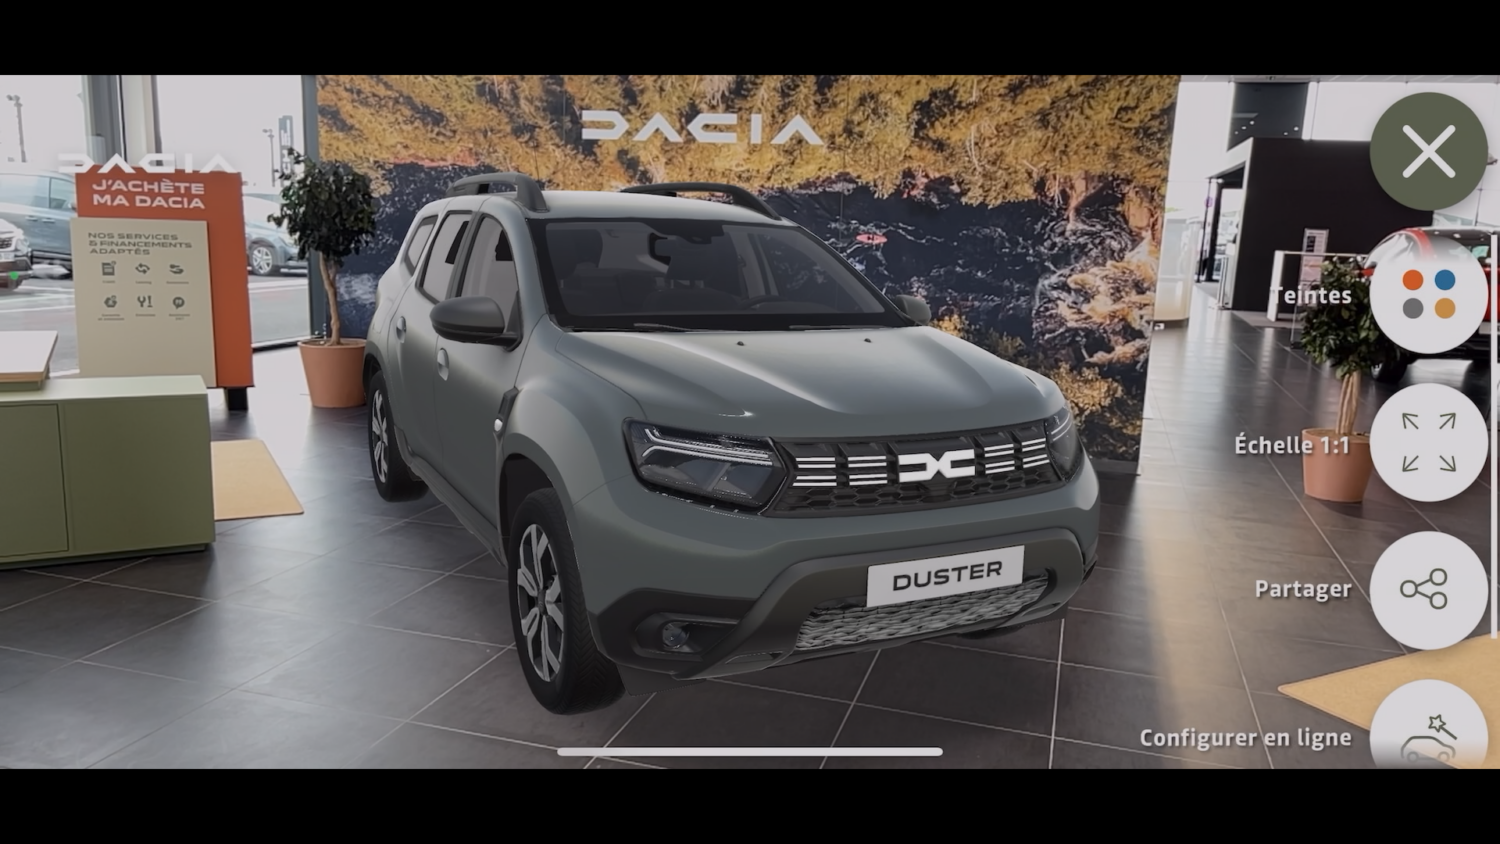 2022 - Dacia AR: the smart and useful augmented reality app